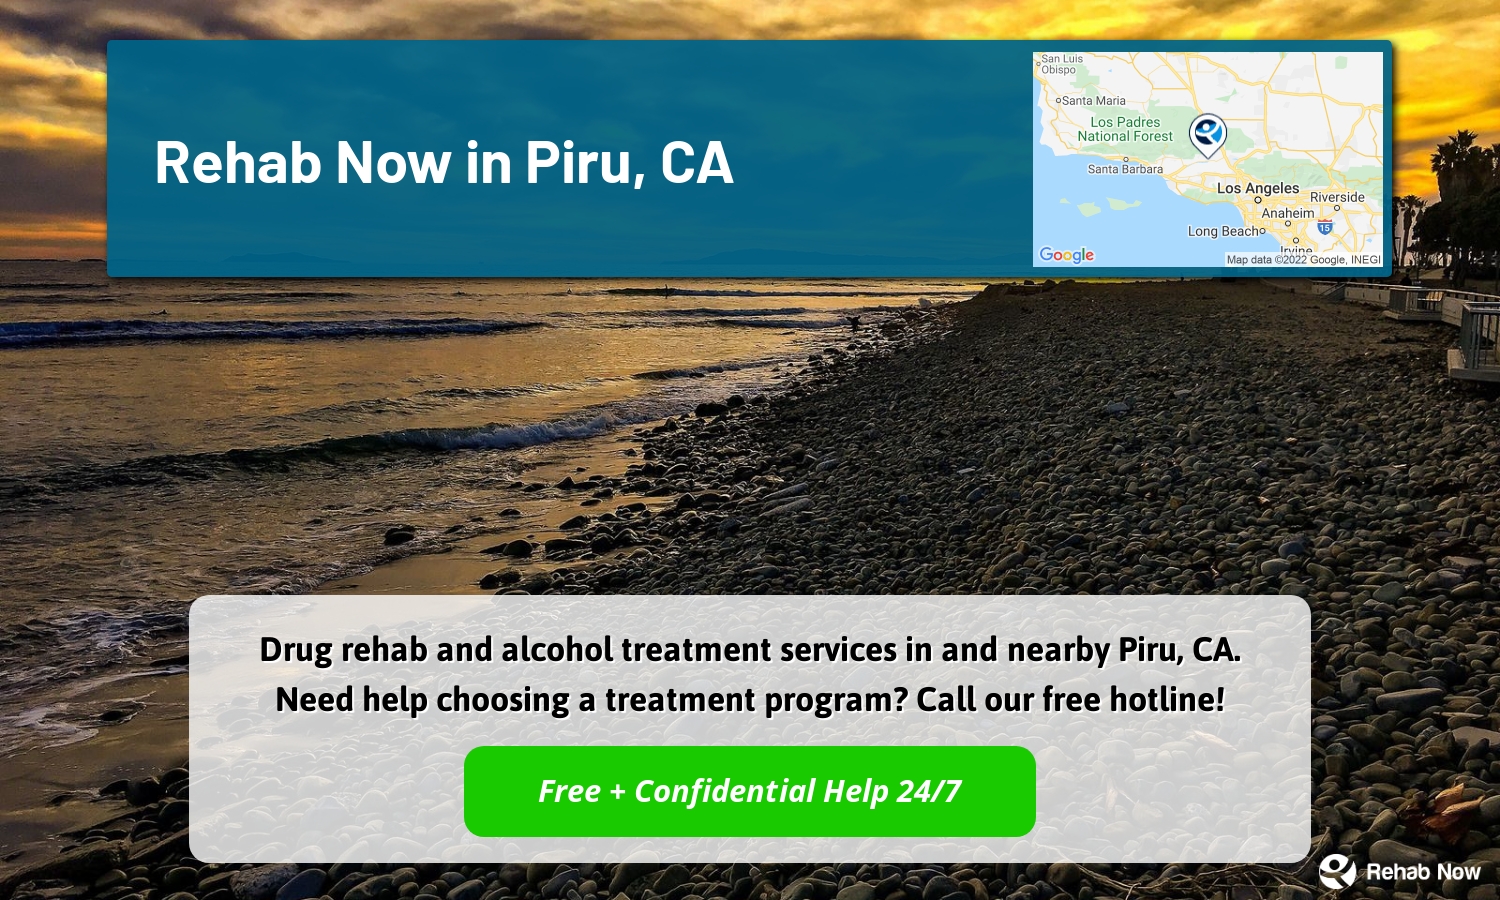 Drug rehab and alcohol treatment services in and nearby Piru, CA. Need help choosing a treatment program? Call our free hotline!